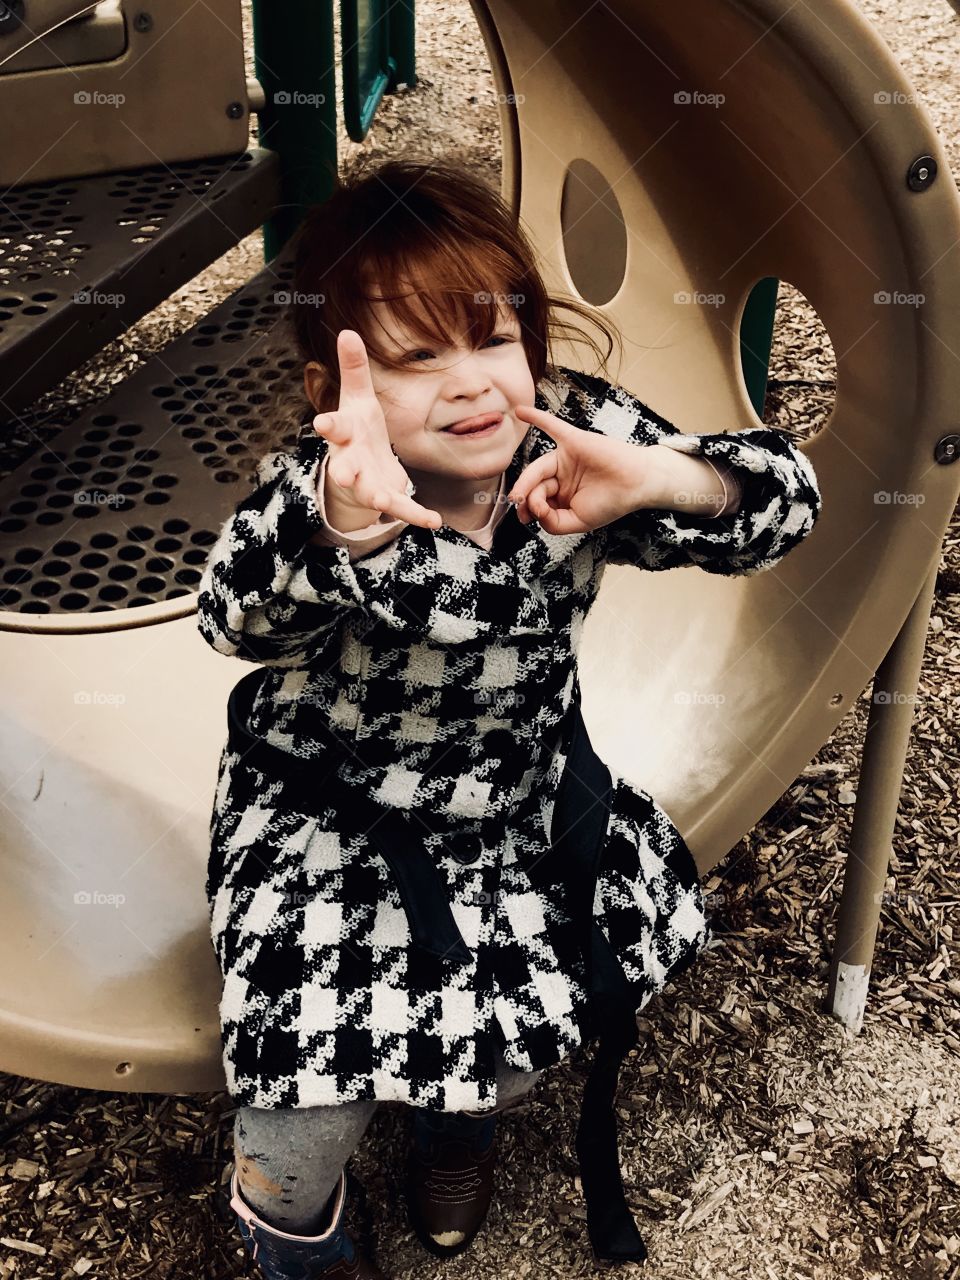 Beautiful red haired girl acting goofy and having fun at our local playground. Wearing a black and white coat and looking dashing. 